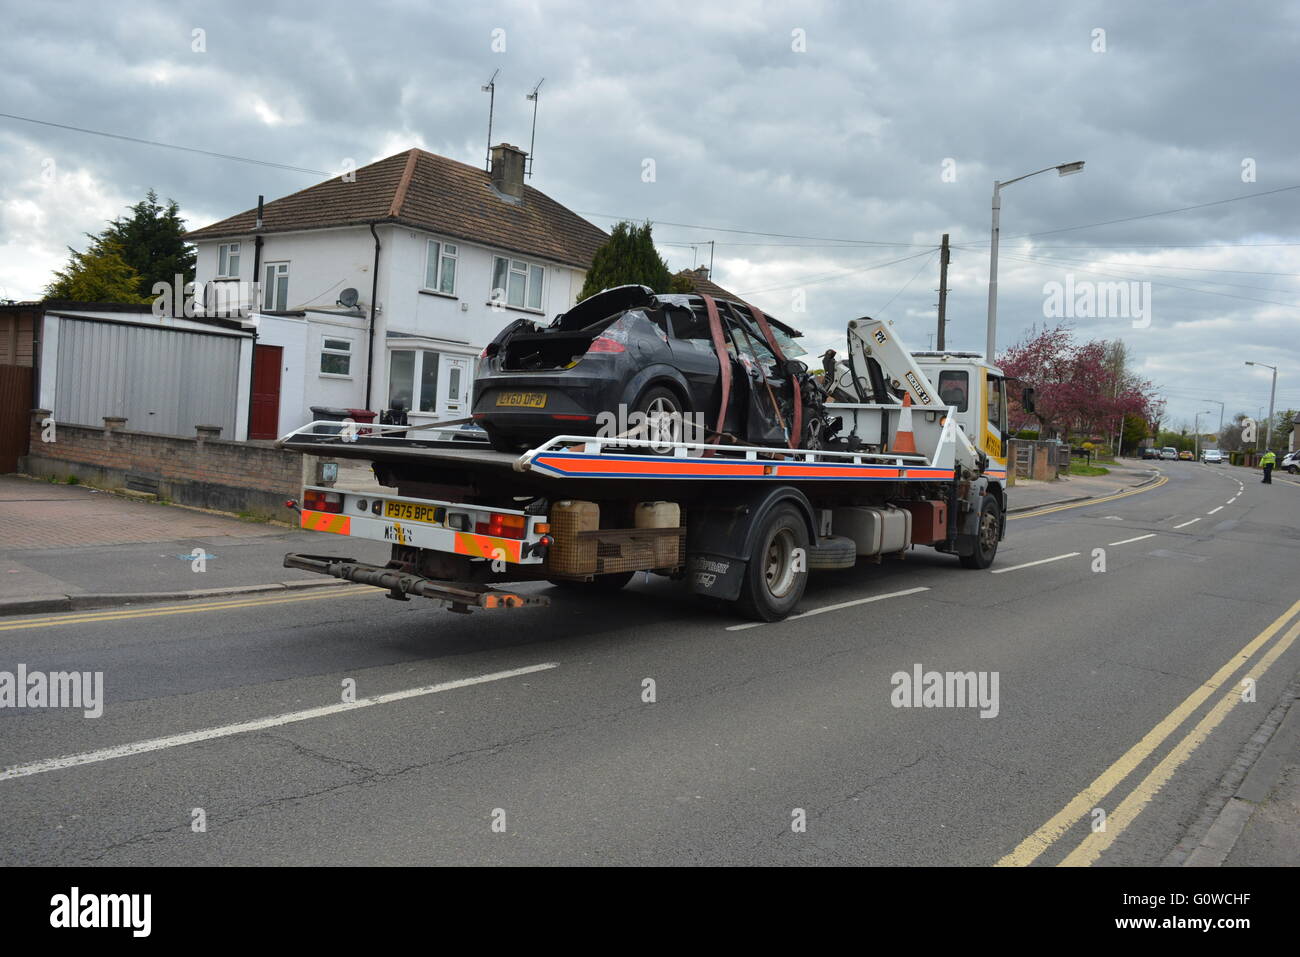 Car lifted after crash in Whitley Wood Lane in Reading, Berkshire. Charles Dye / Alamy Live News Stock Photo